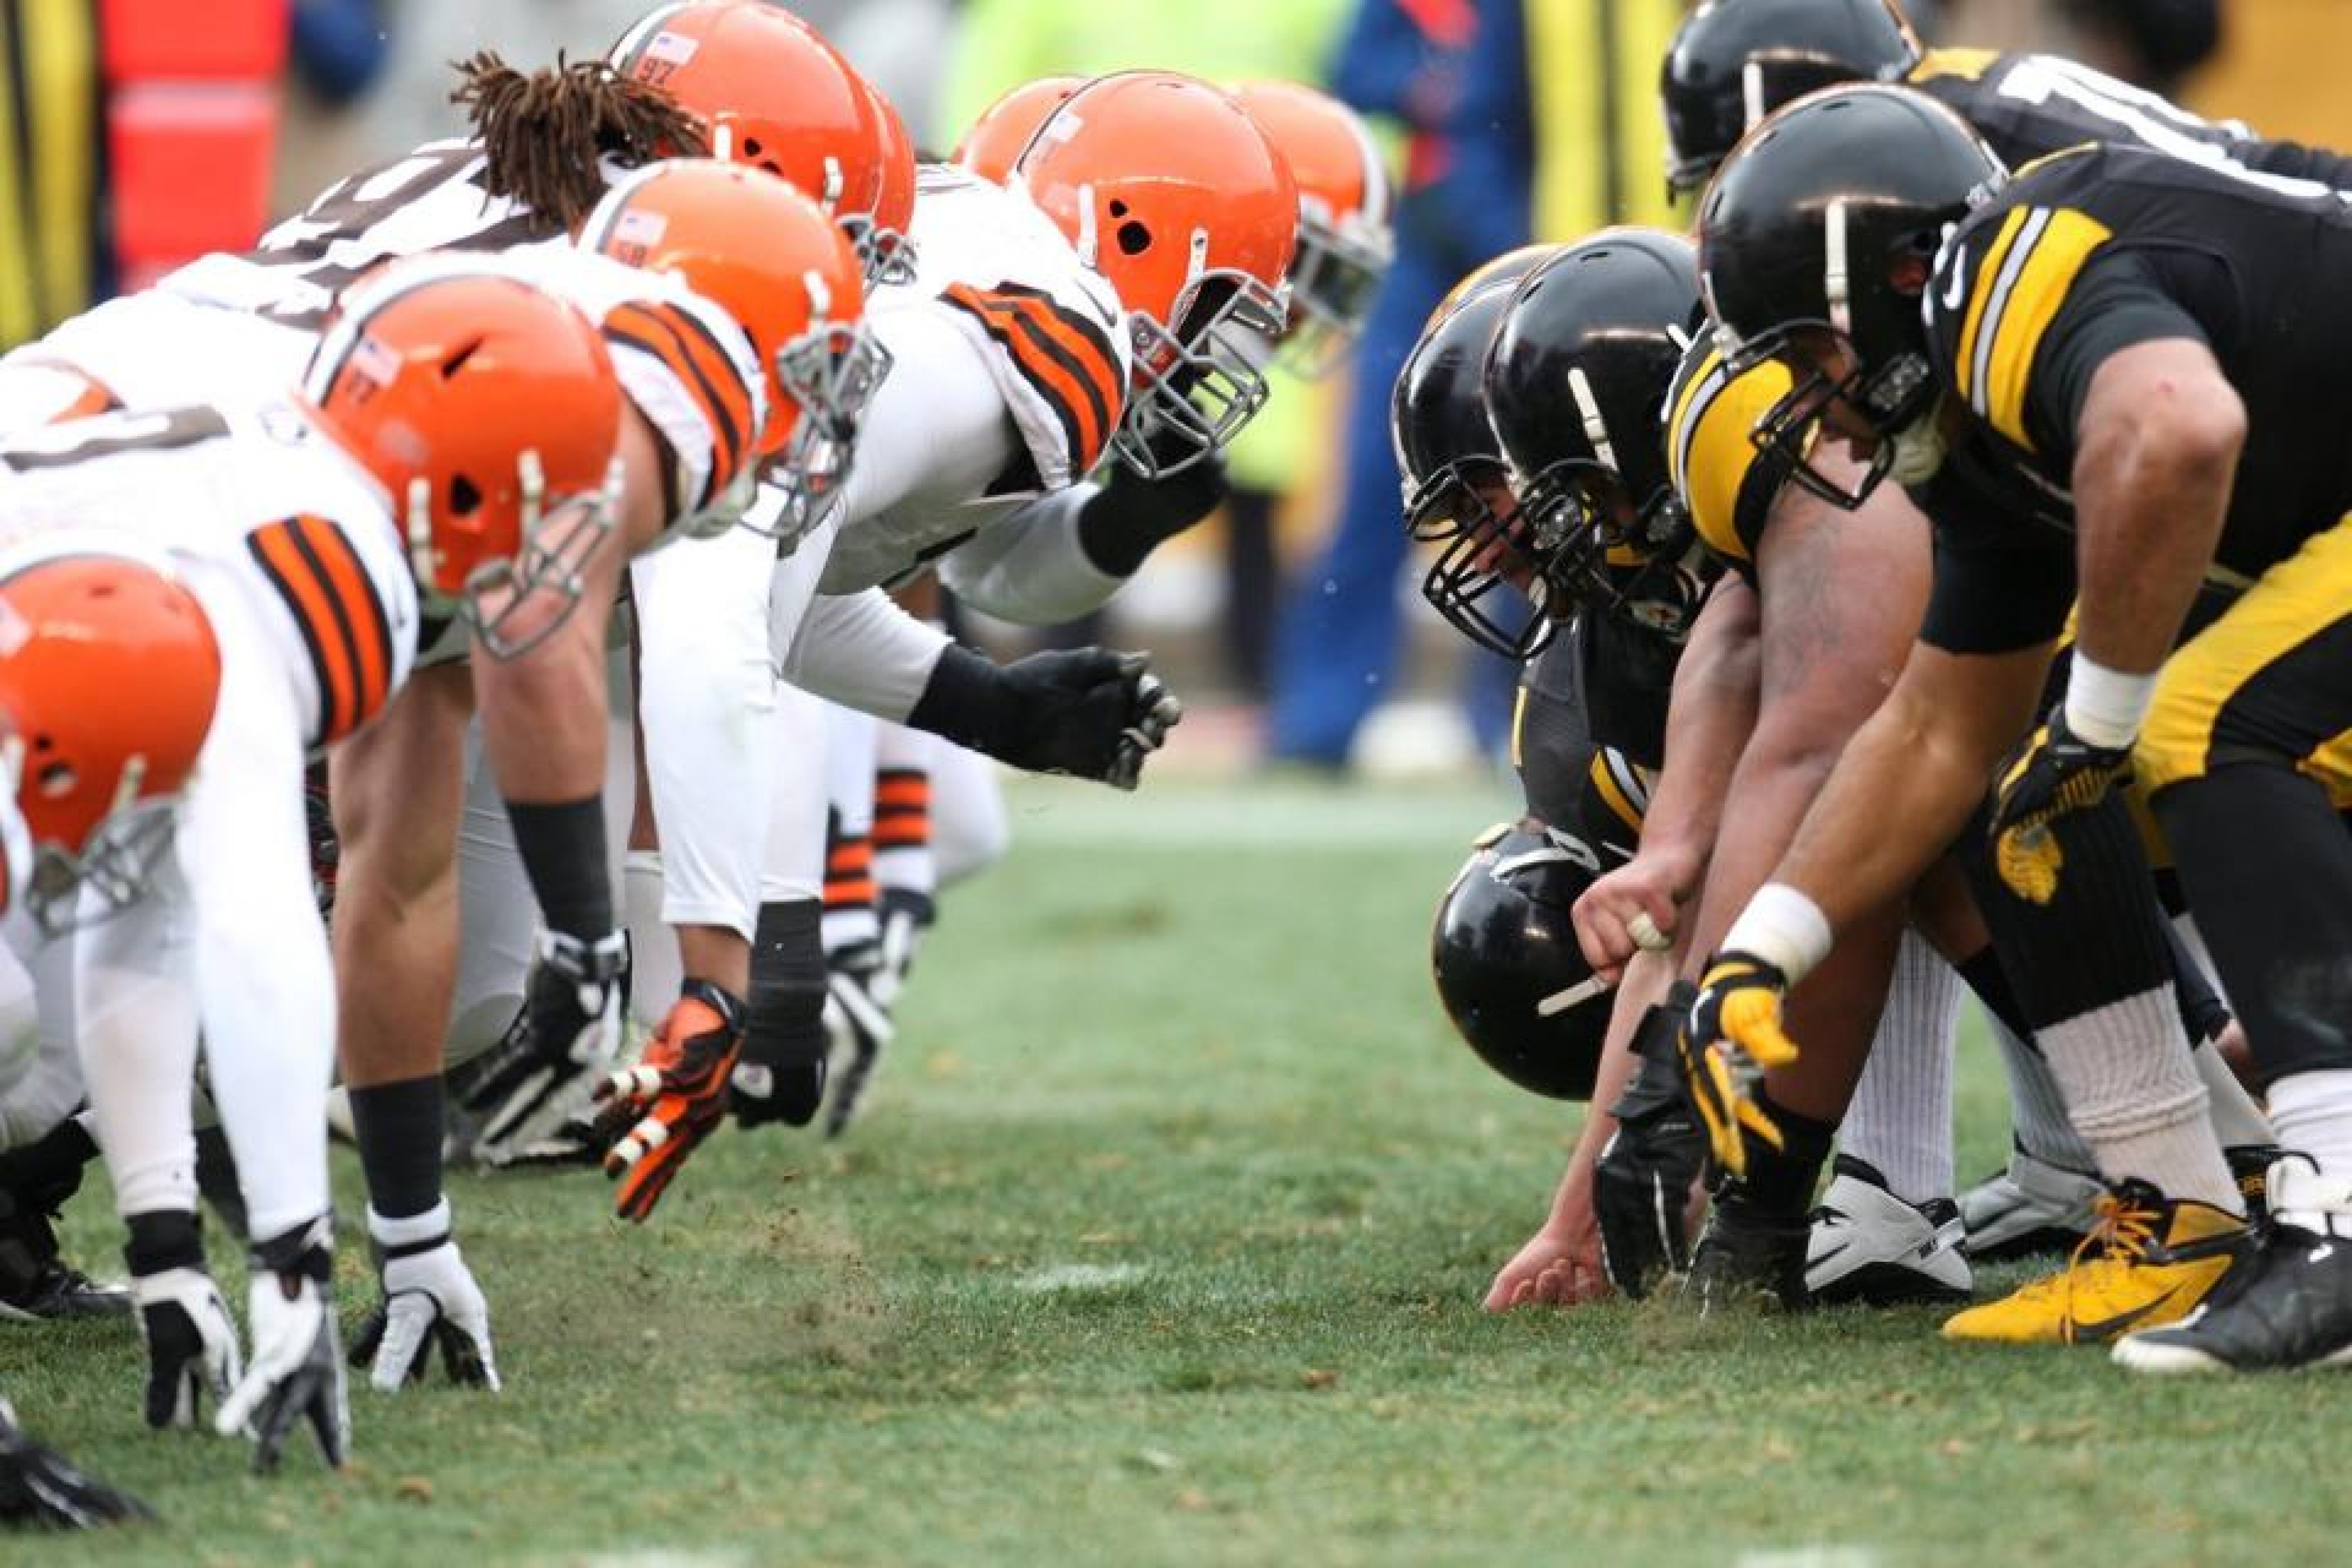 2018 NFL Week 1 Preview: the Cleveland Browns look to topple the Pittsburgh Steelers